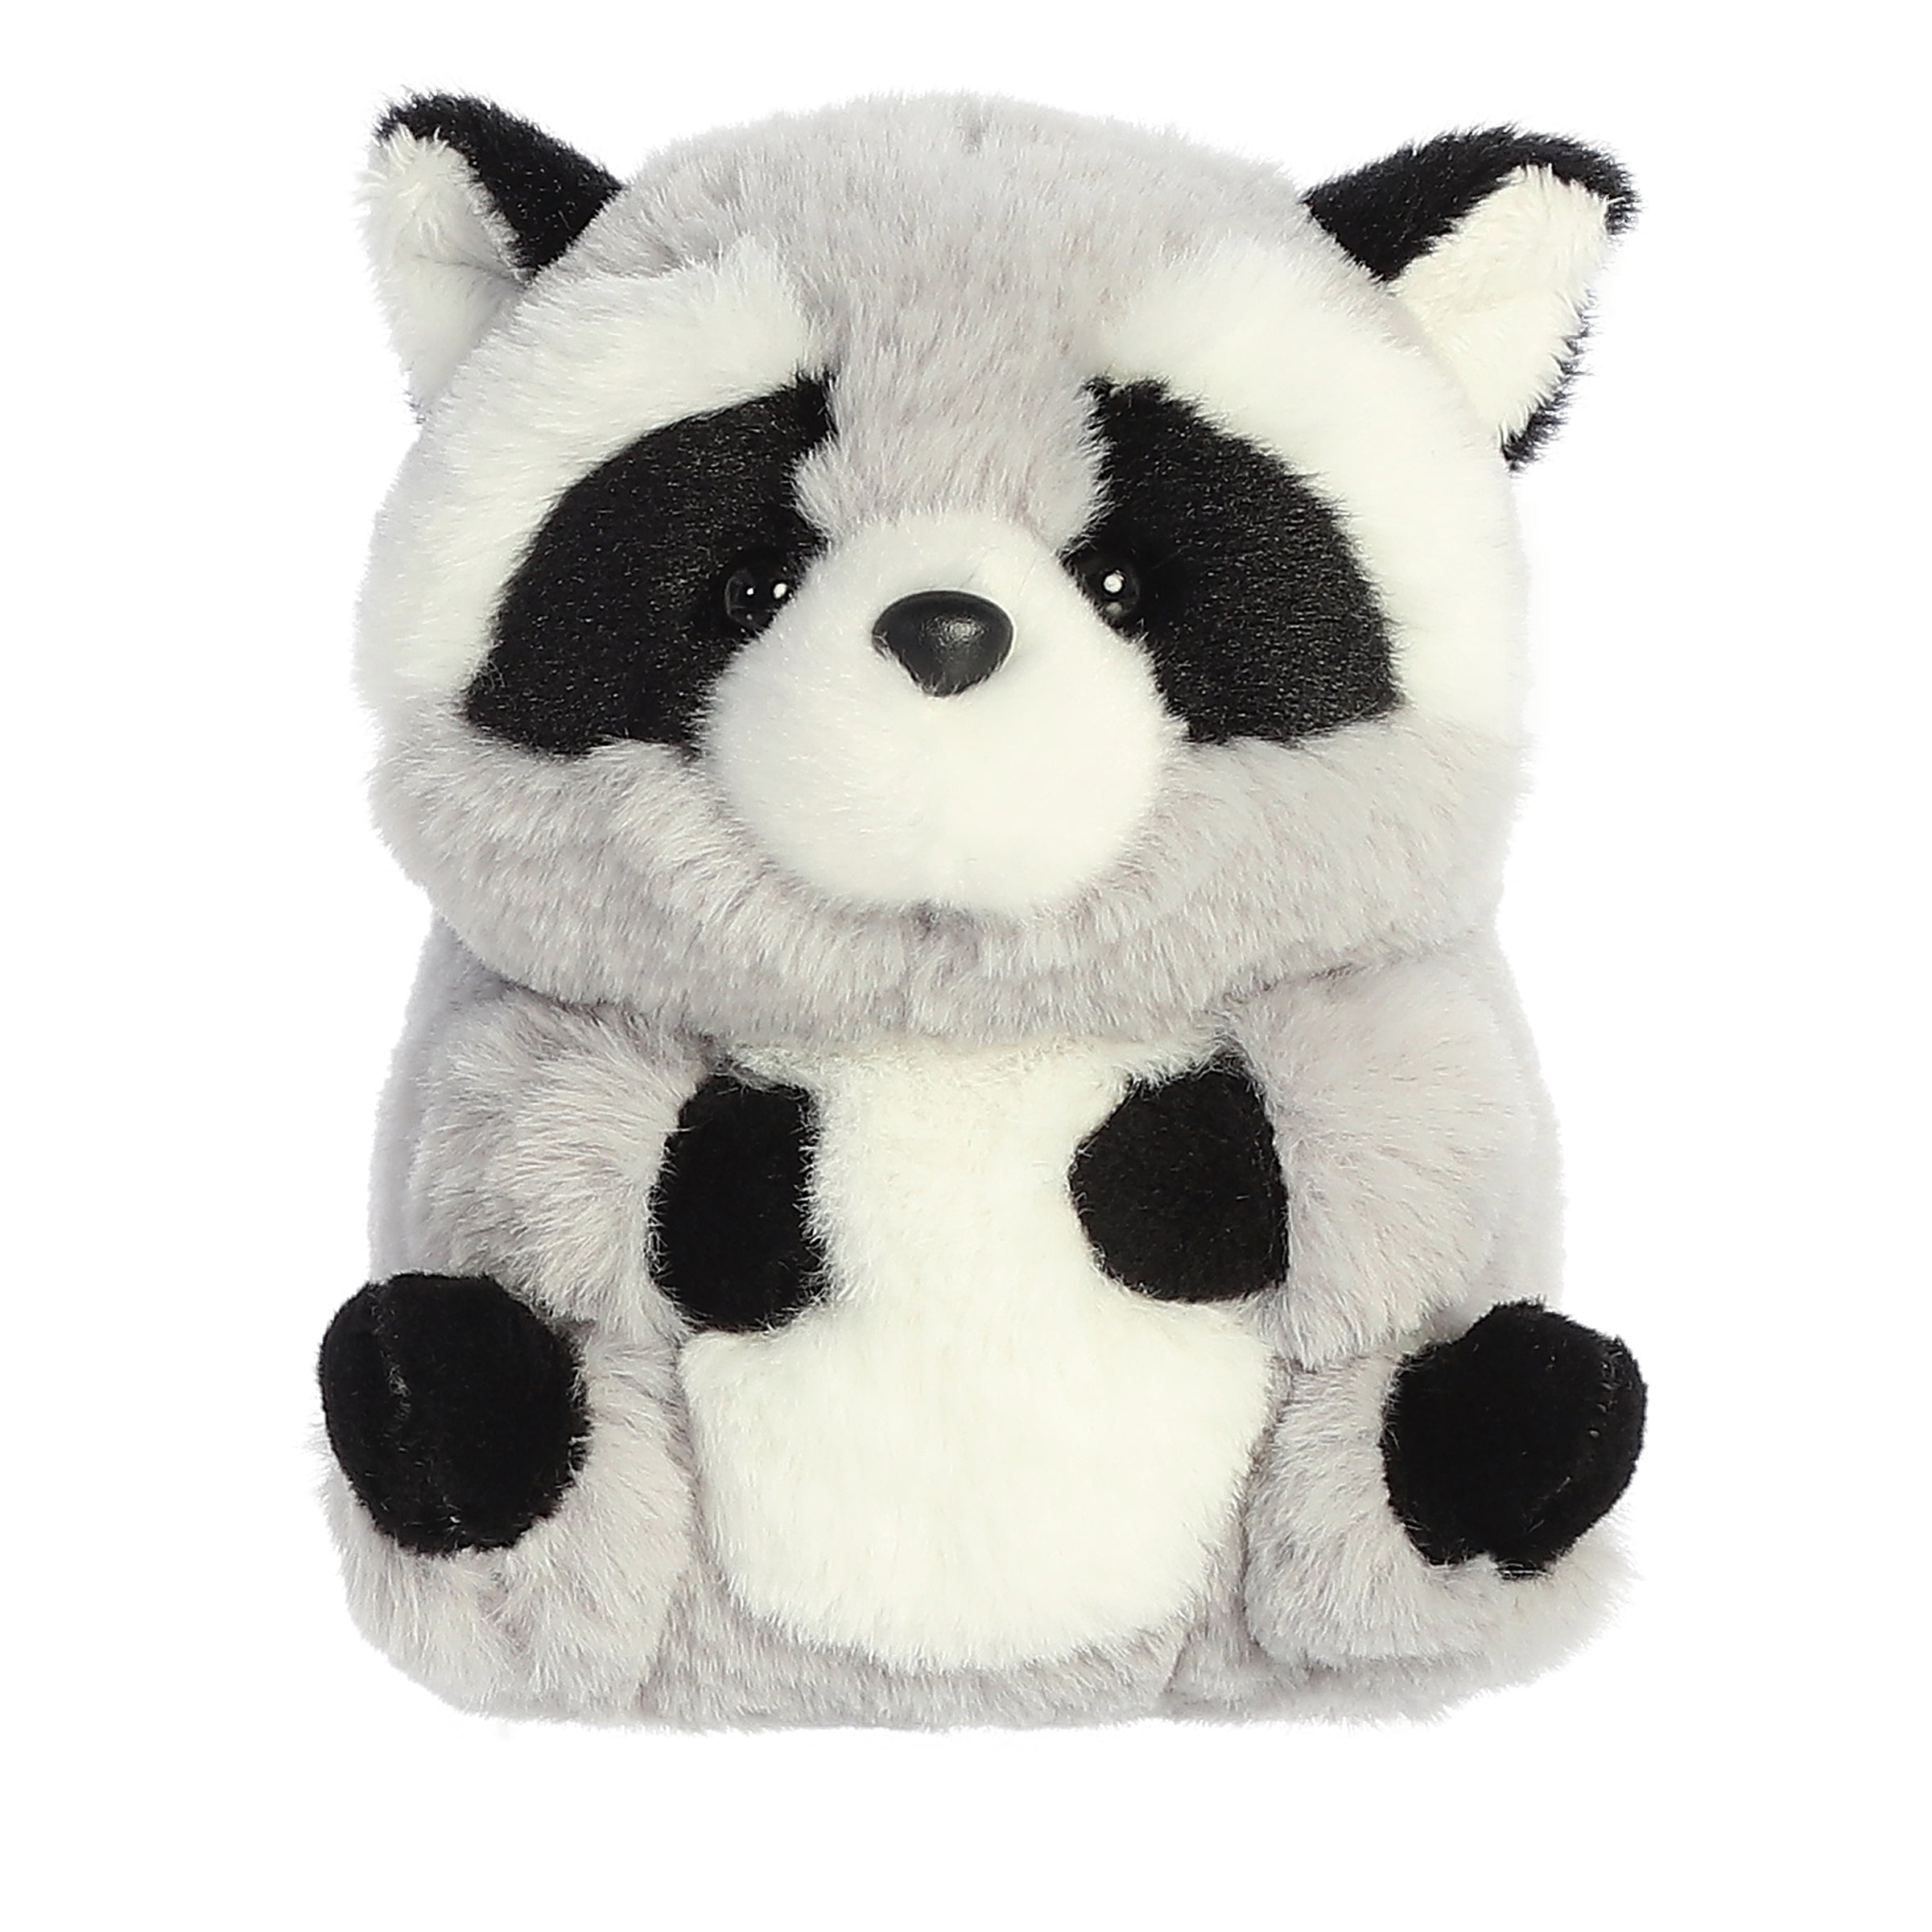 Raccoon plush, with black-framed eyes and white accents on a gray coat, perched playfully, with arms on the tum and legs up.